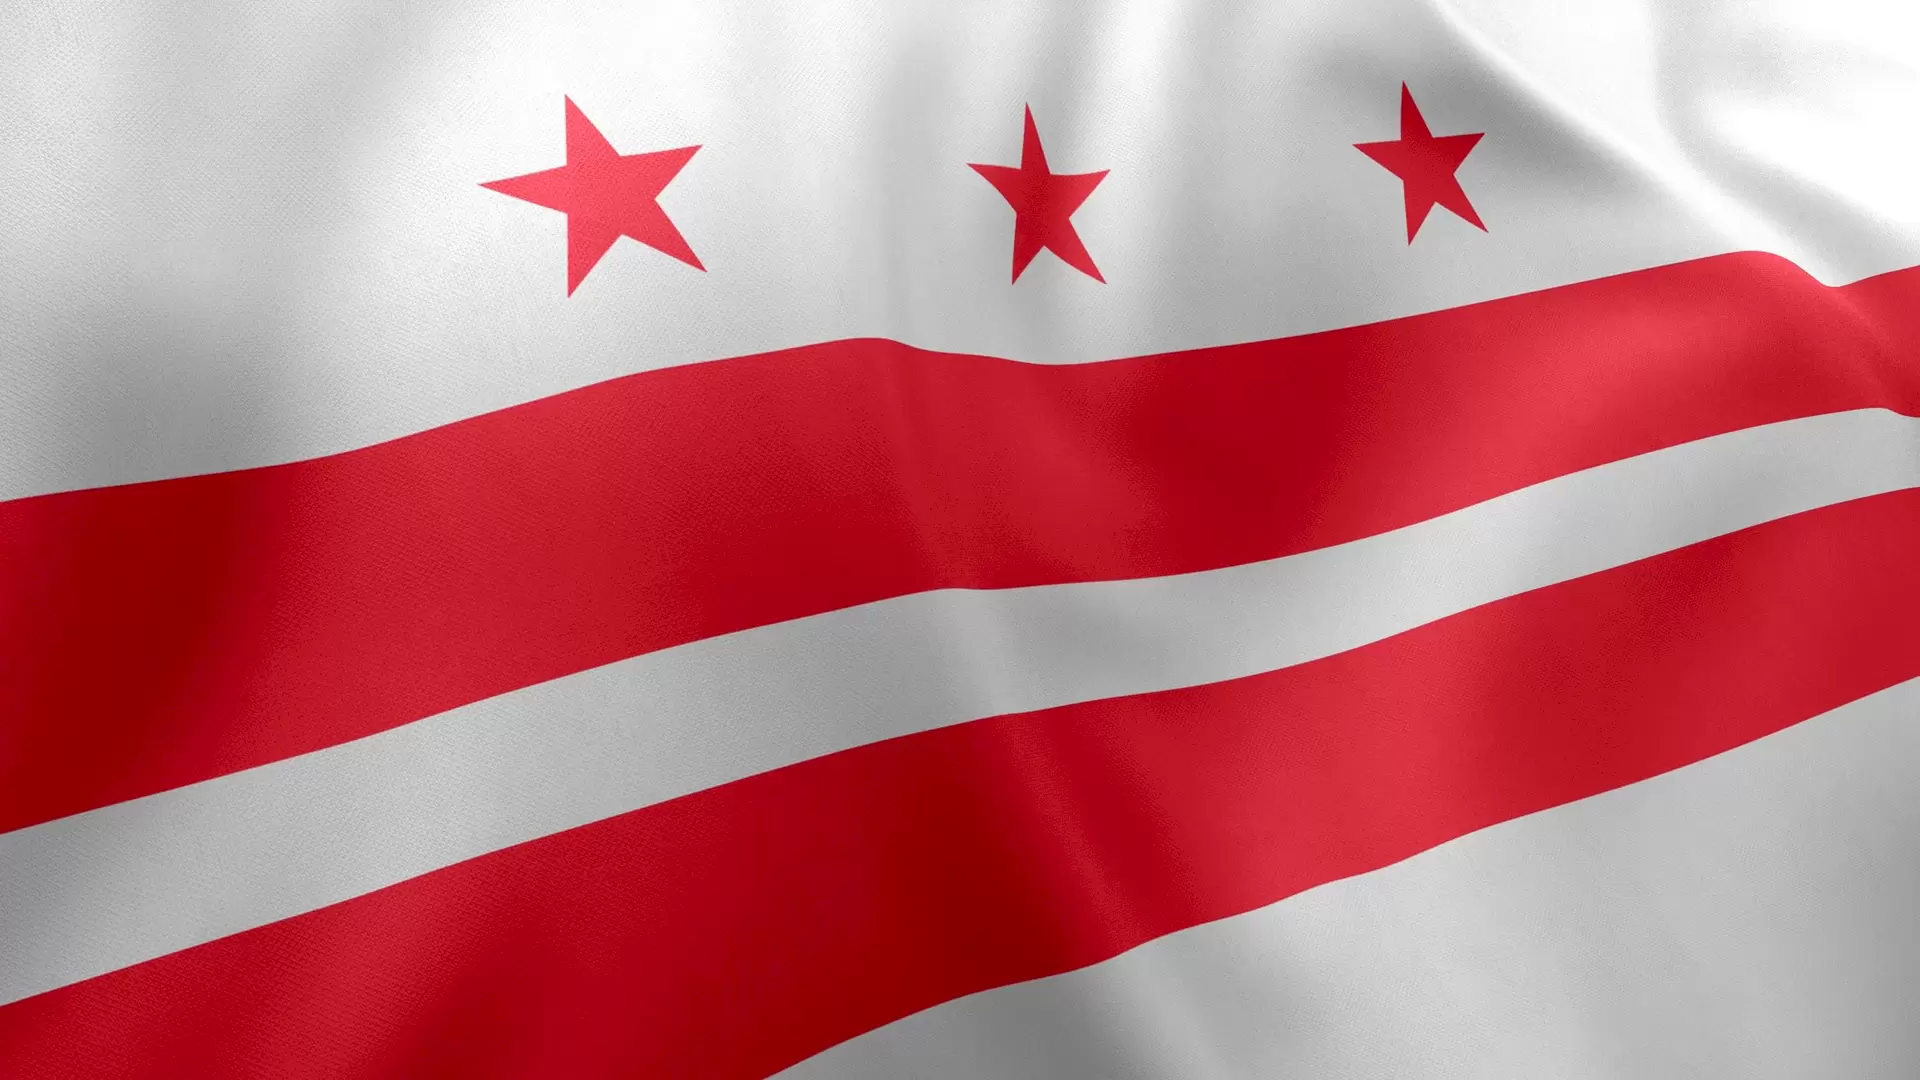 District of Columbia Charter Bus | District of Columbia Bus Rental